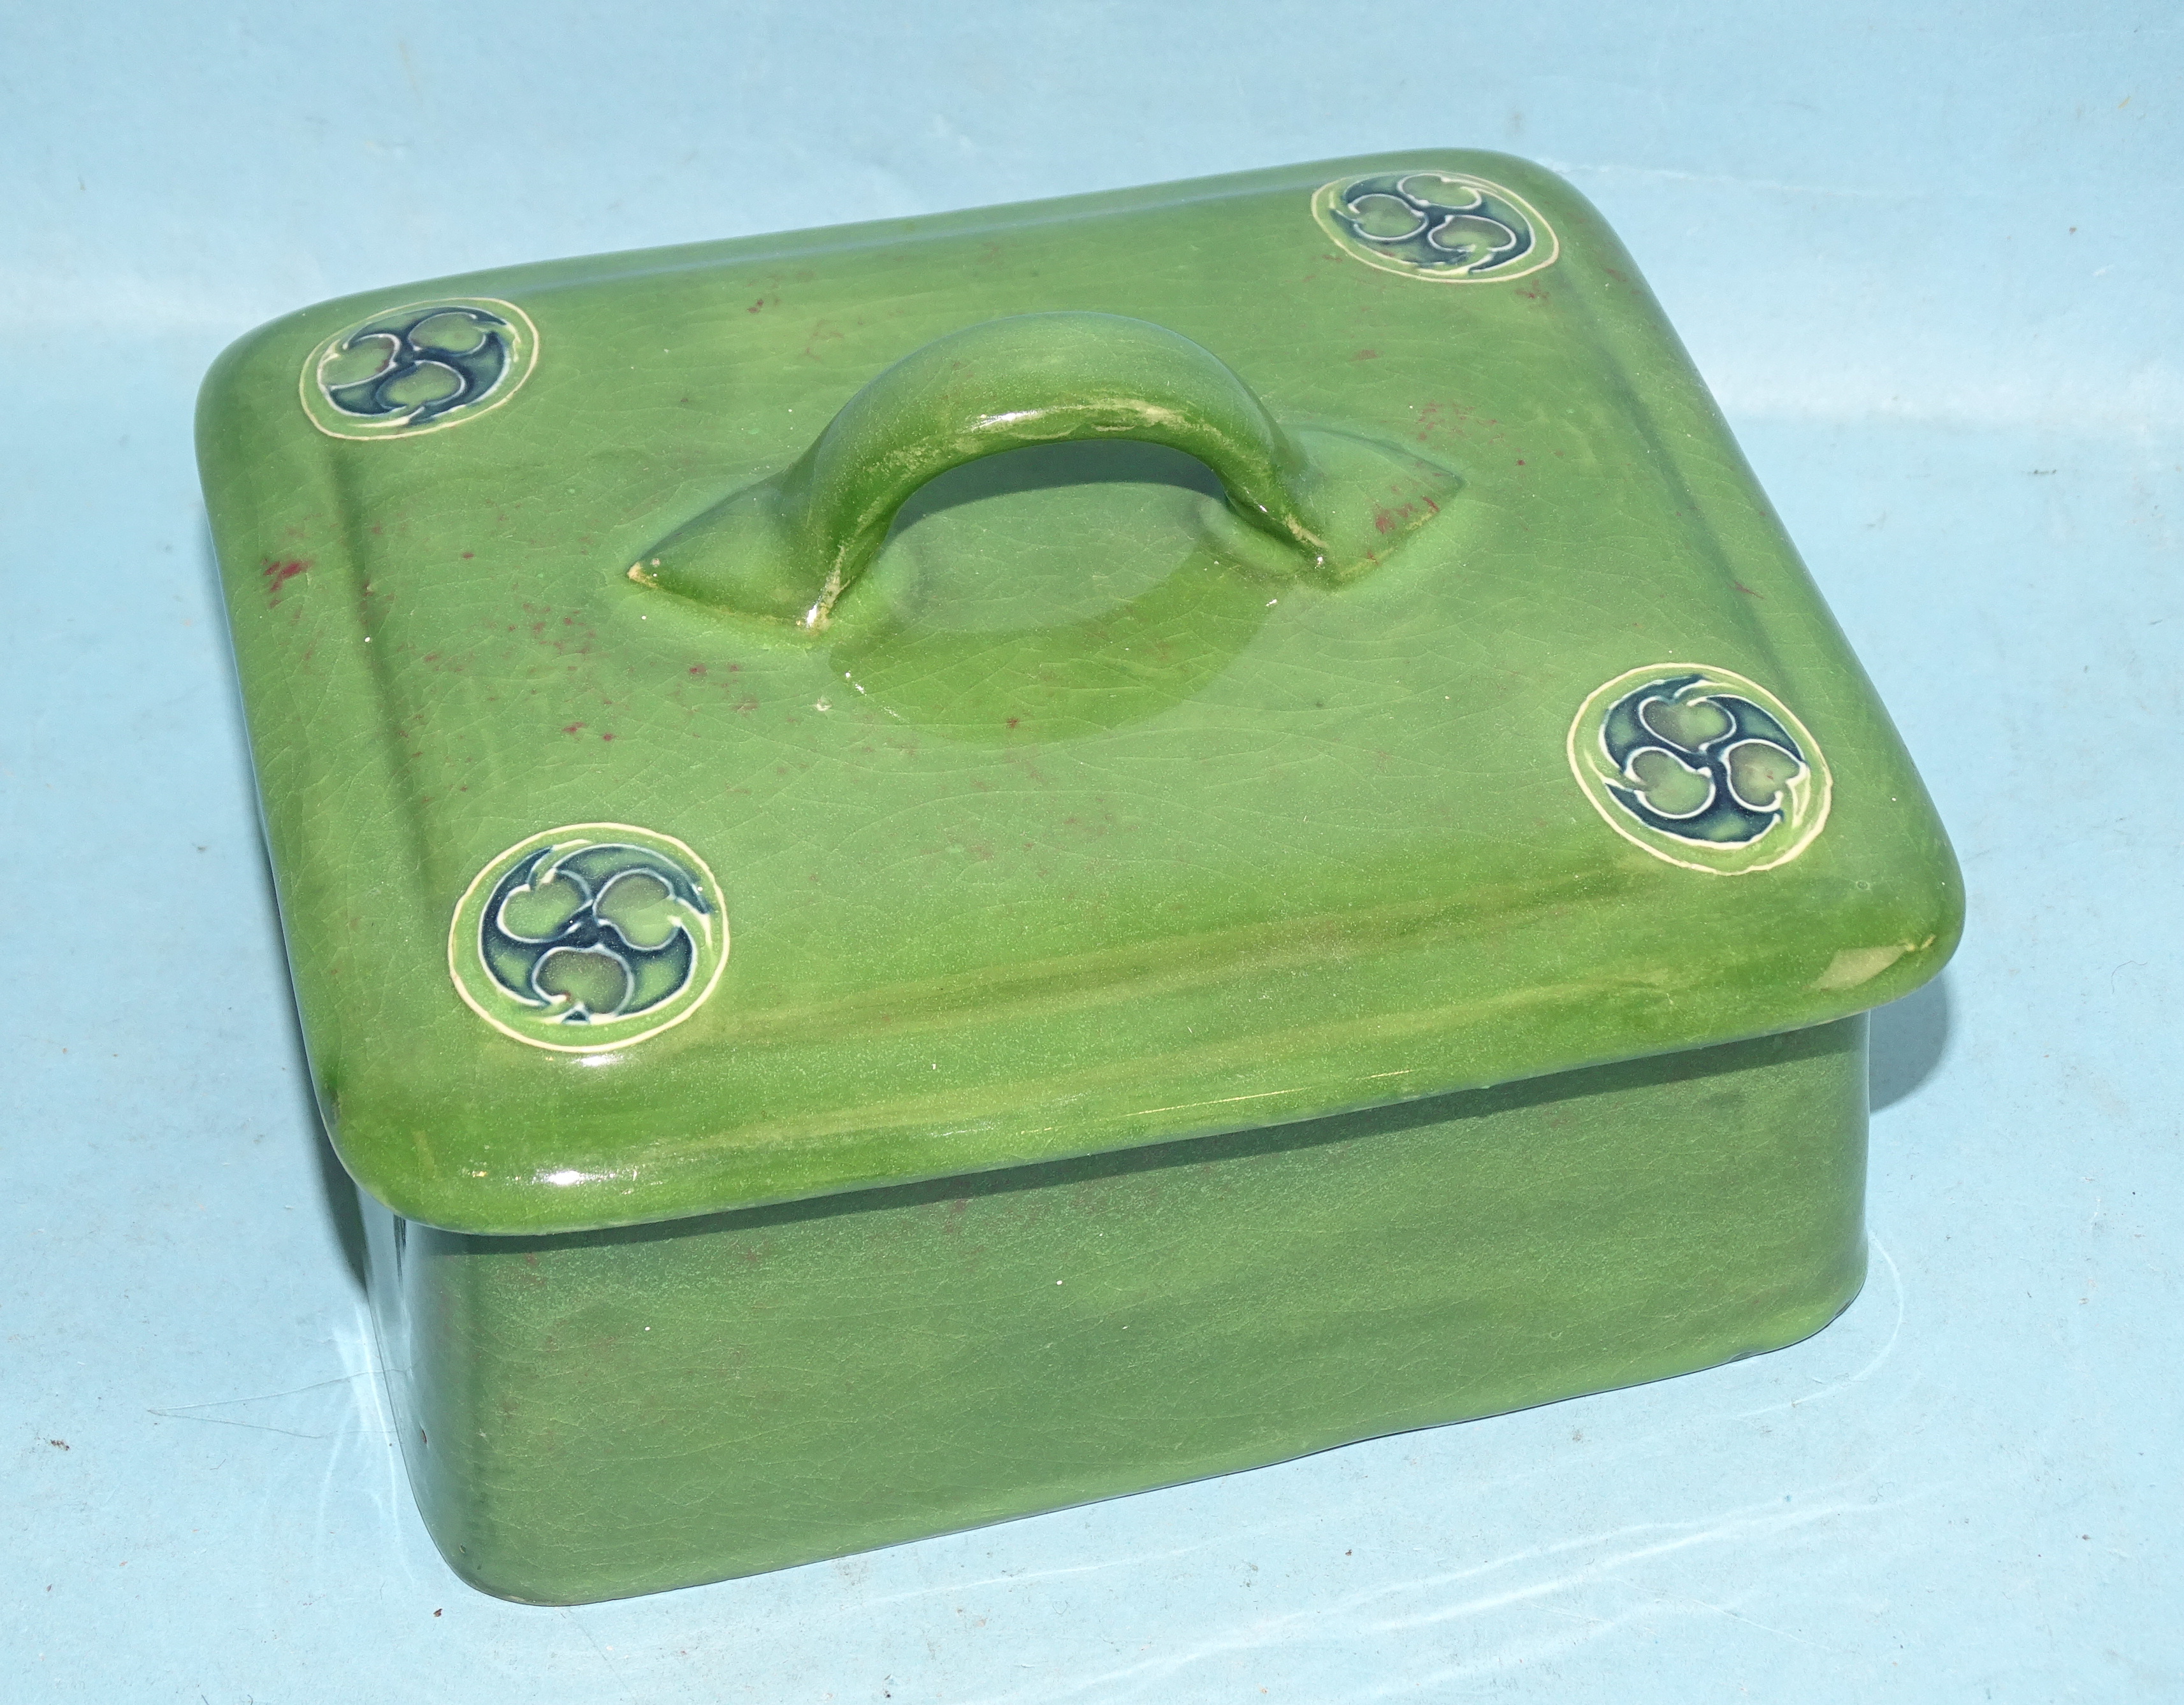 A Moorcroft for Liberty & Co. flamminian ware green-glazed rectangular box and cover, with handle